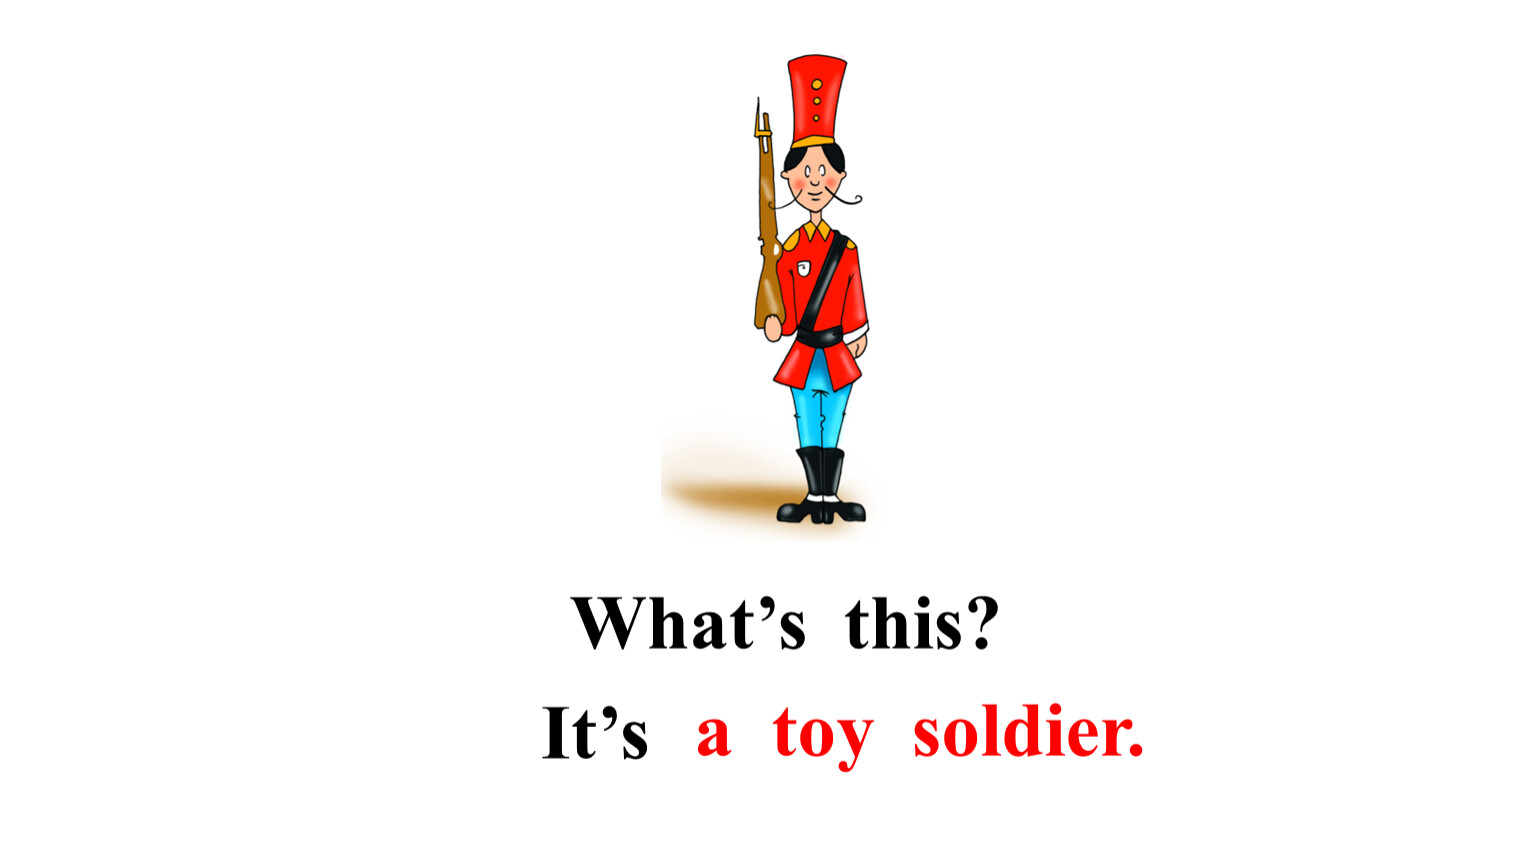 My toy soldier is very nice. Toy Soldier спотлайт. My Toys Spotlight 2 класс презентация. Спотлайт 2 my Toys. My Toys 2 класс спотлайт Toy Soldier.